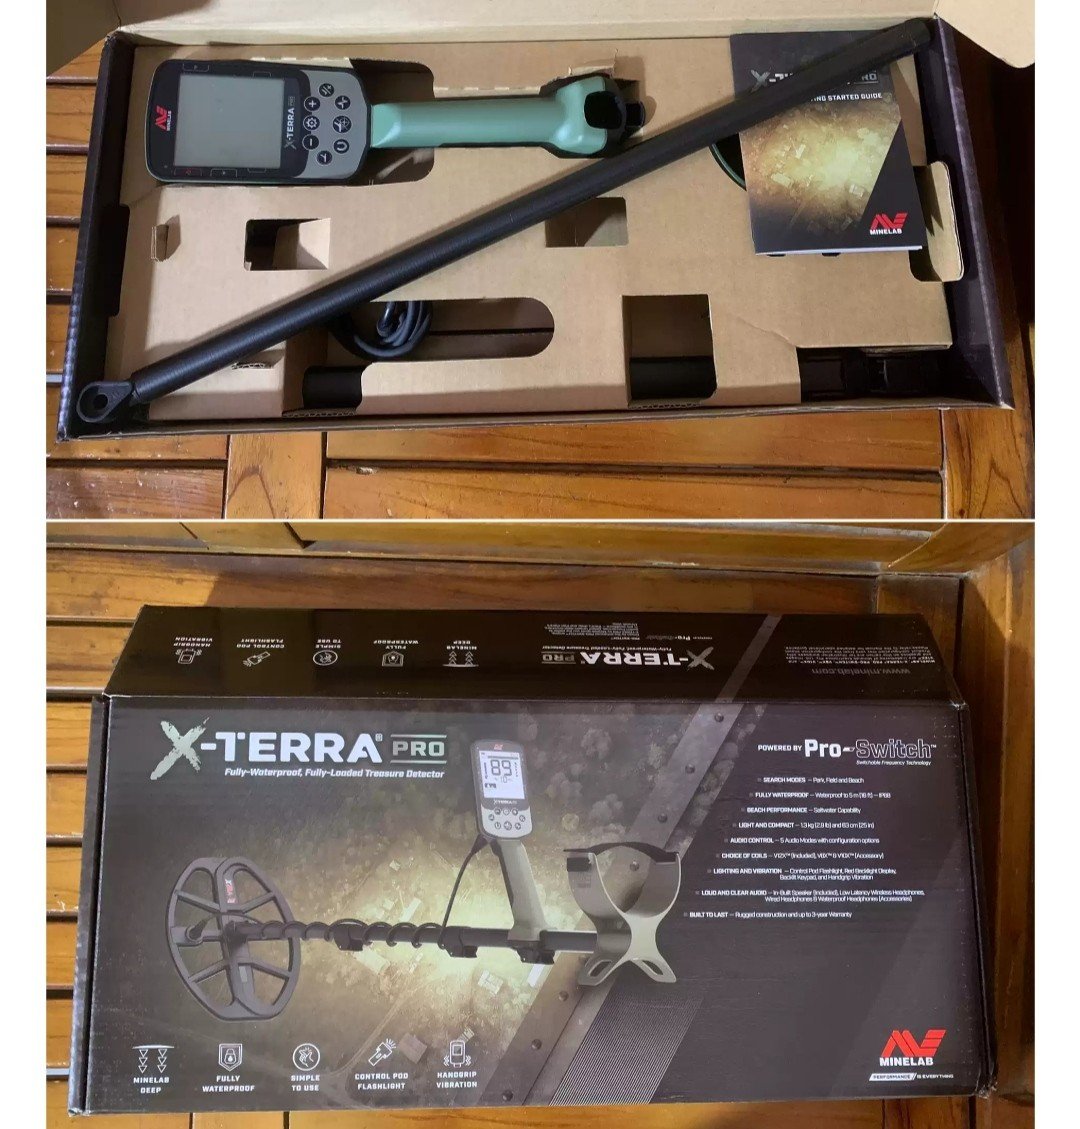 Unboxing of the Minelab X-Terra Pro